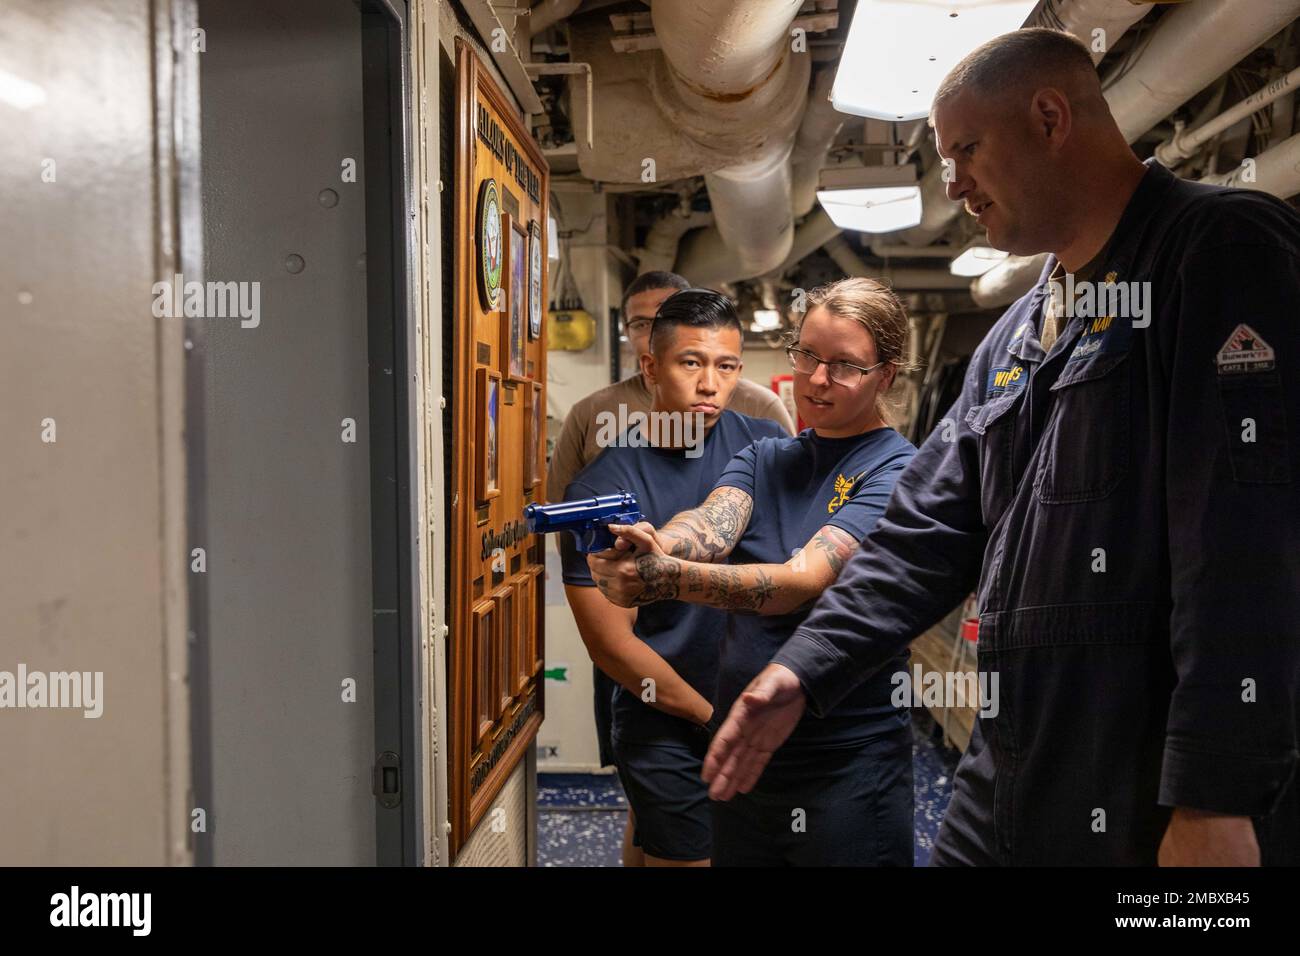 220622-N-TC847-1003 ATLANTIC OCEAN (June 22, 2022) Chief Intelligence Specialist Jason Williams, assigned to the Ticonderoga-class guided-missile cruiser USS Leyte Gulf (CG 55), instructs Boatswain’s Mate 3rd Class Brittany Gonzales during a surface reaction force (SRF) bravo class, June 22, 2022. The George H.W. Bush Carrier Strike Group (CSG) is underway completing a certification exercise to increase U.S. and allied interoperability and warfighting capability before a future deployment. The George H.W. Bush CSG is an integrated combat weapons system that delivers superior combat capability Stock Photo